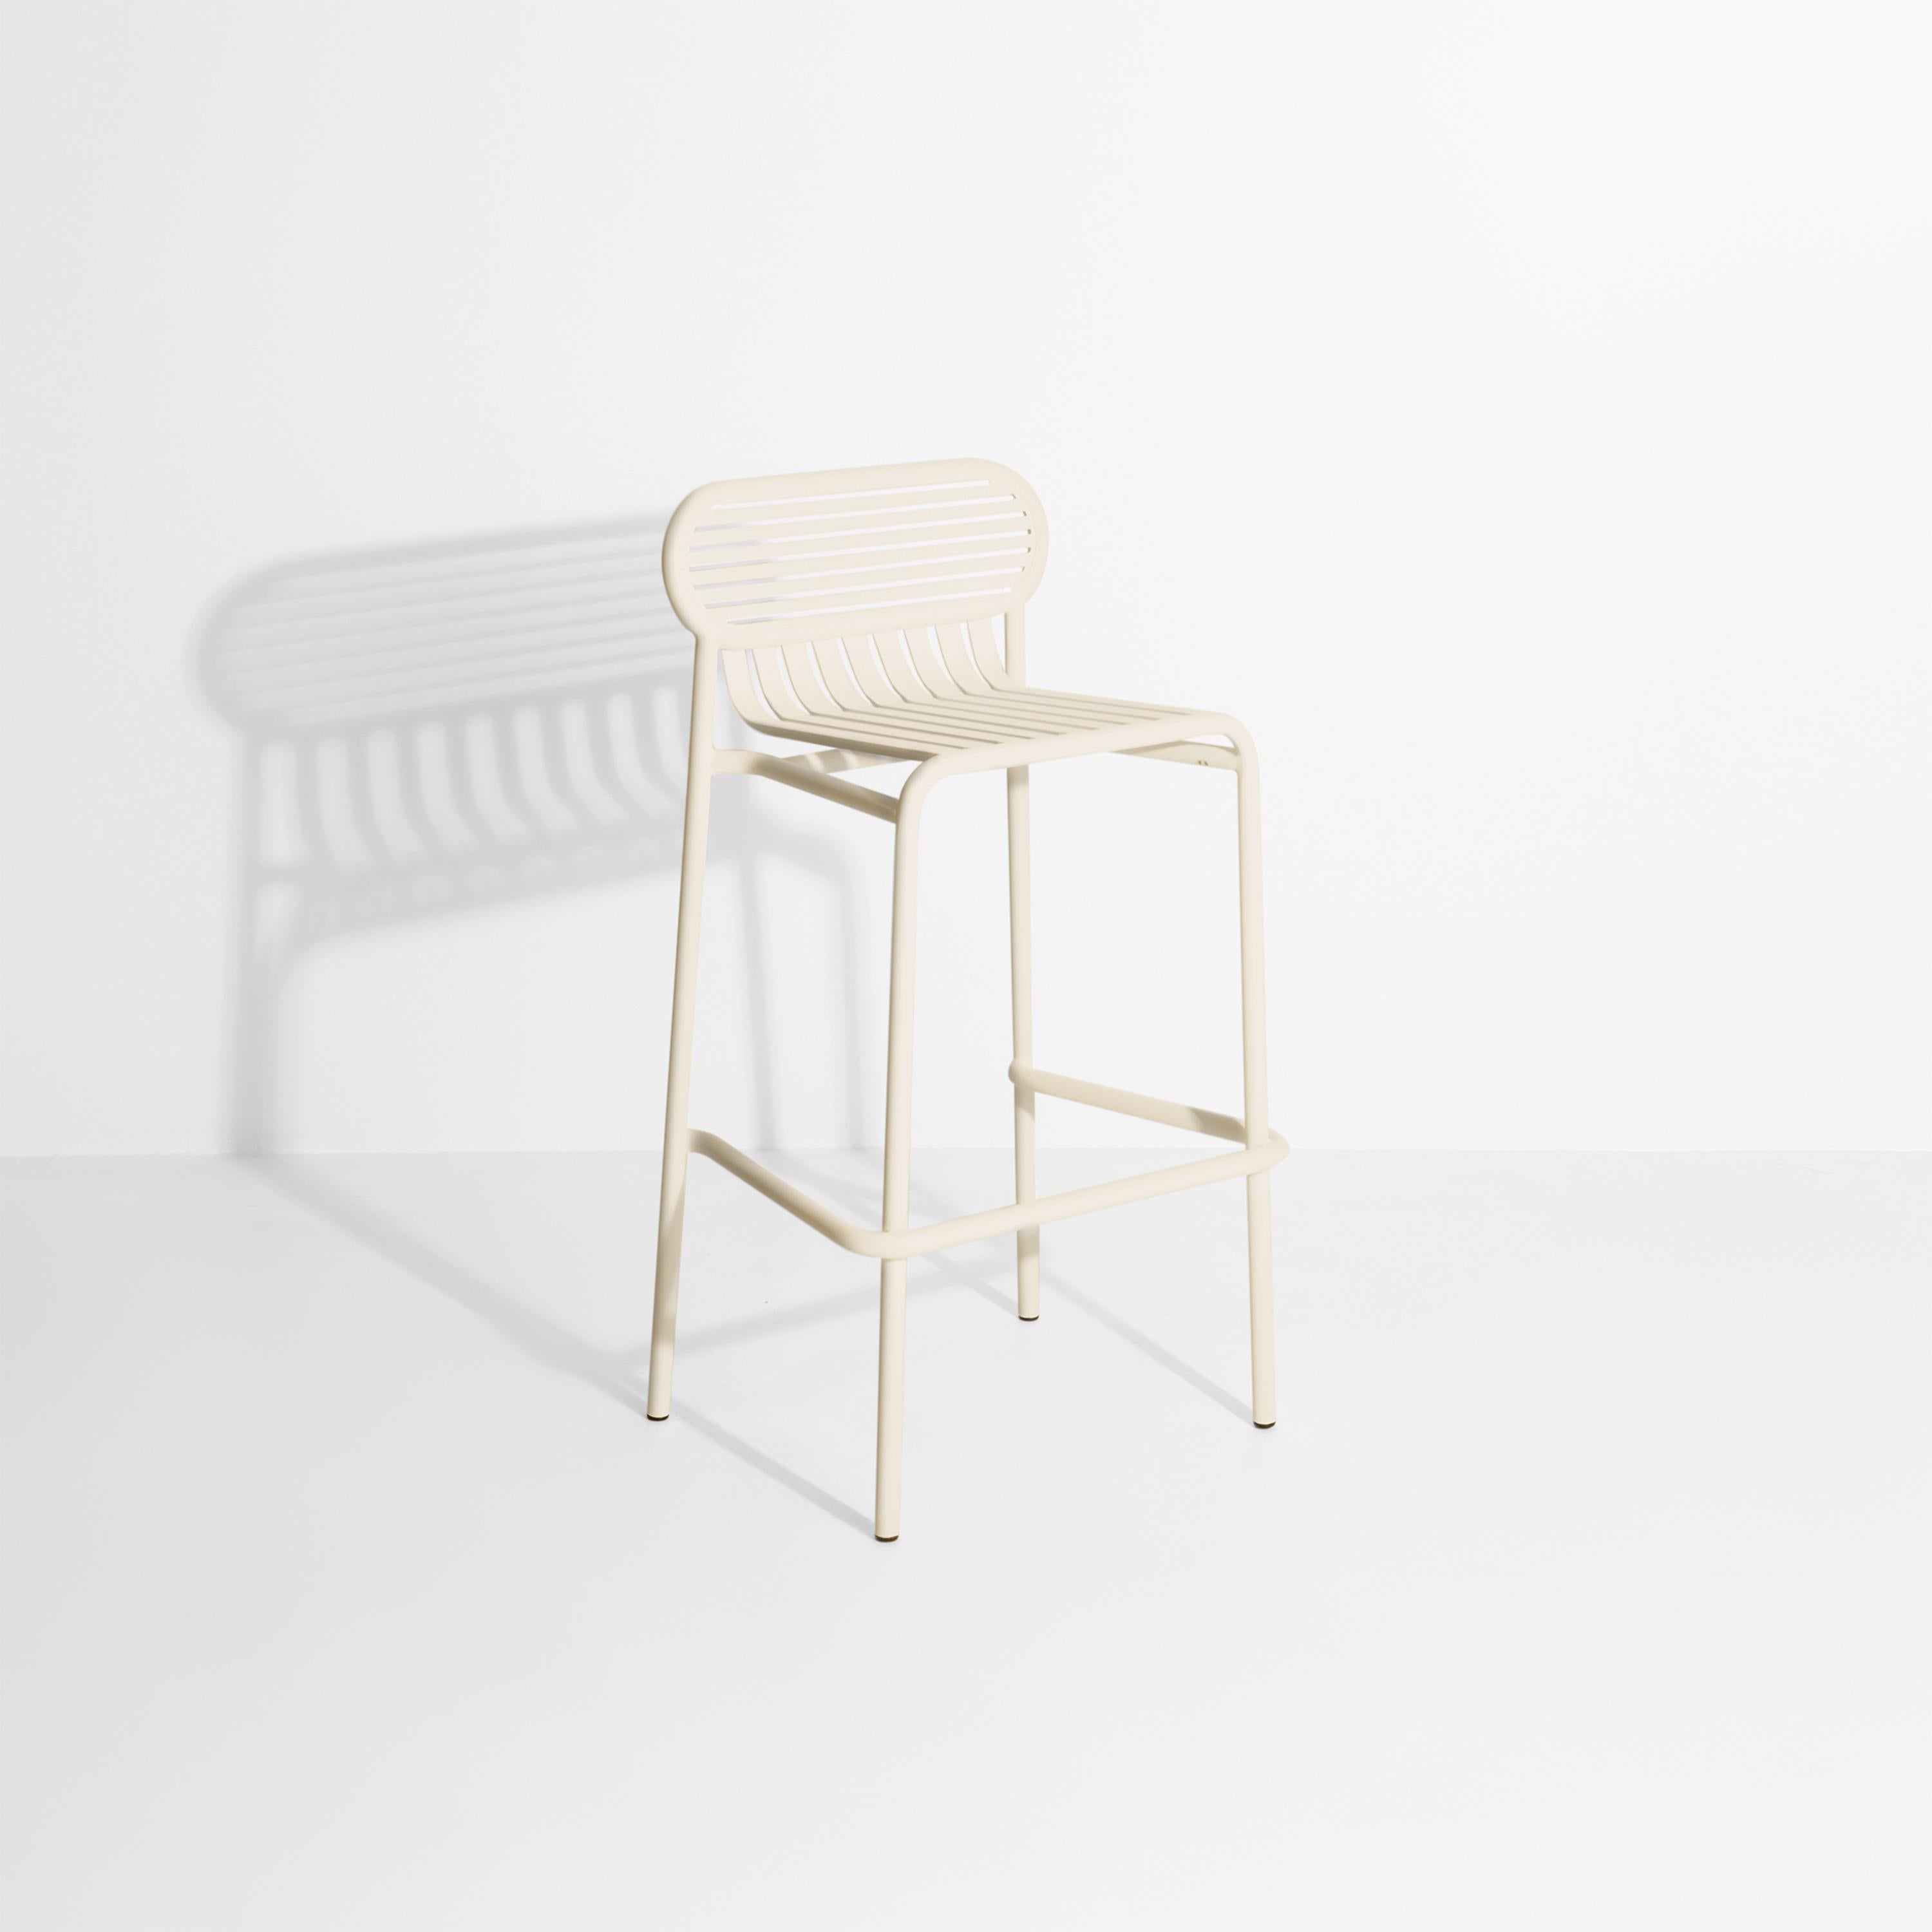 Petite Friture Week-End Bar Stool in Ivory Aluminium by Studio BrichetZiegler, 2017

The week-end collection is a full range of outdoor furniture, in aluminium grained epoxy paint, matt finish, that includes 18 functions and 8 colours for the